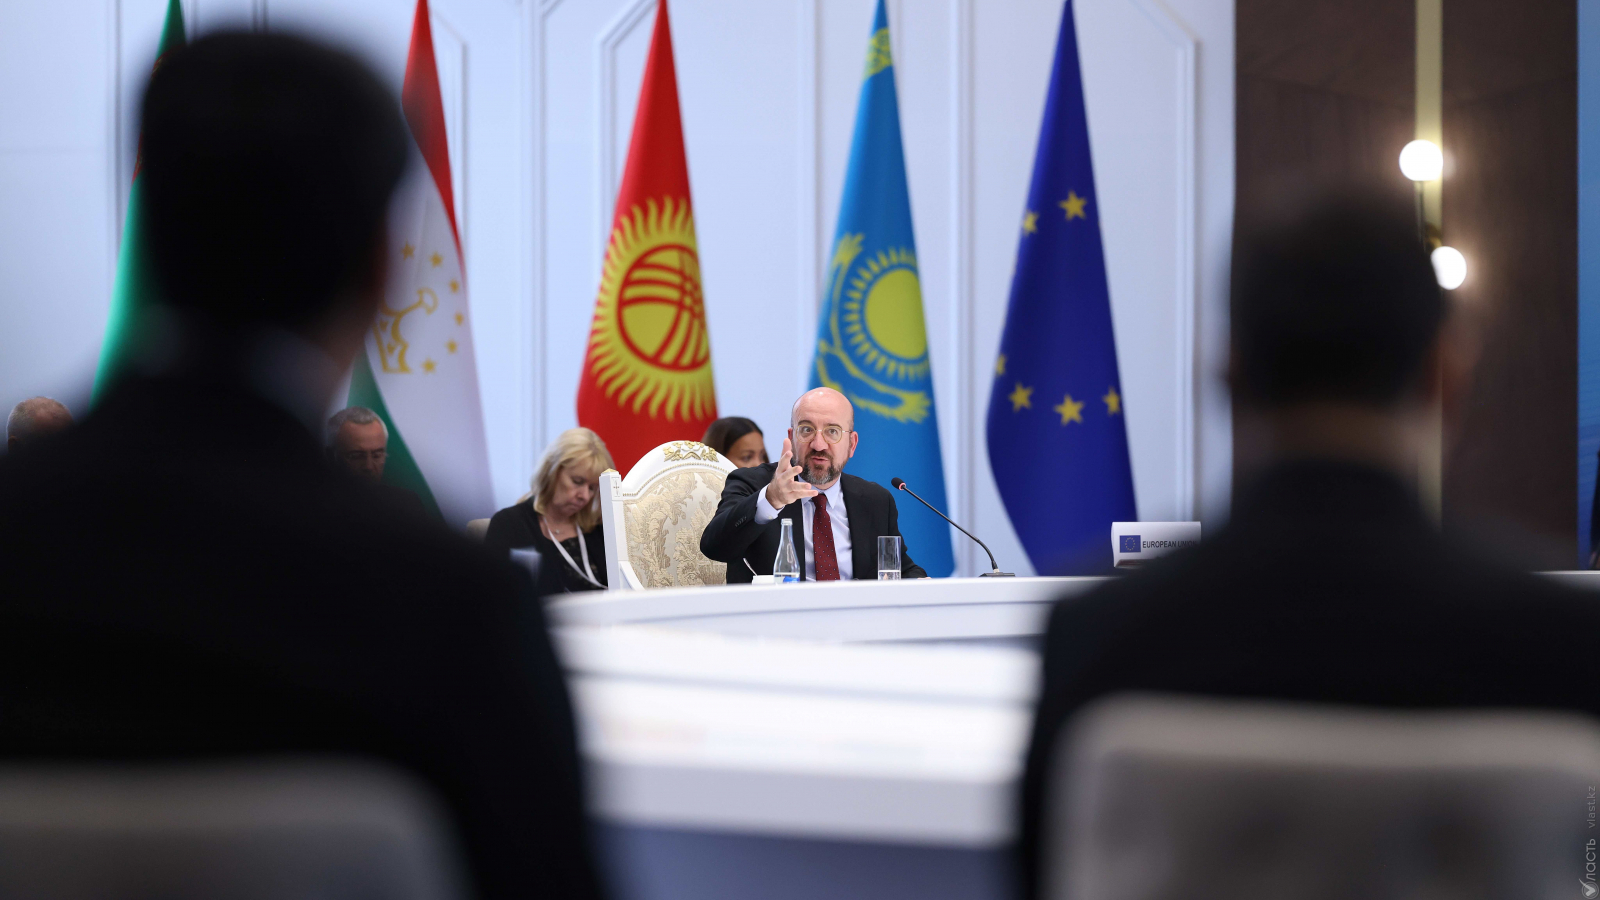 The EU Woos Central Asian Countries at Summit in Kyrgyzstan